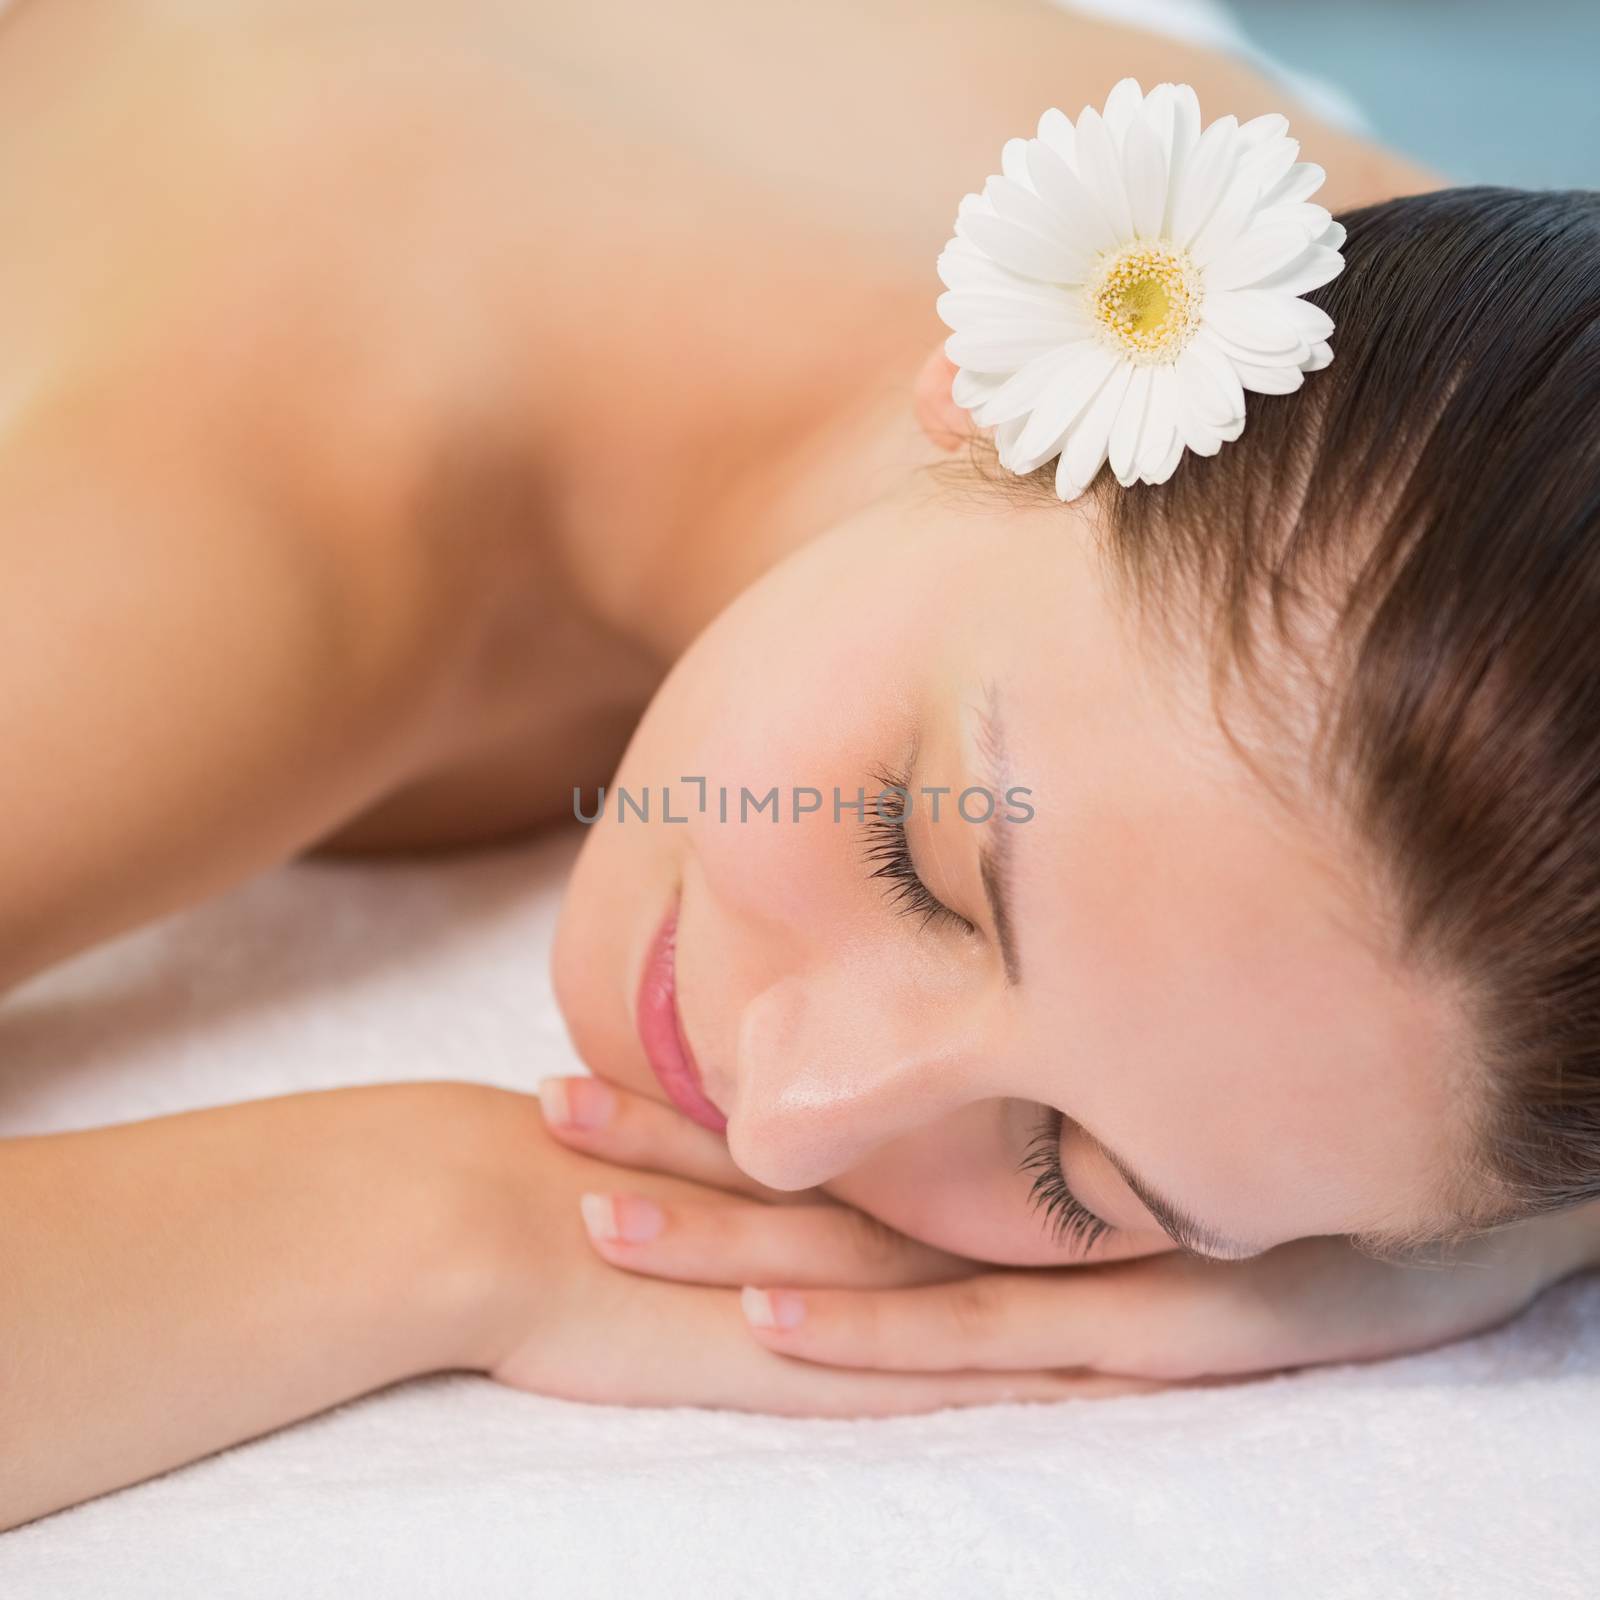 Close up of a beautiful young woman lying on massage table at spa center